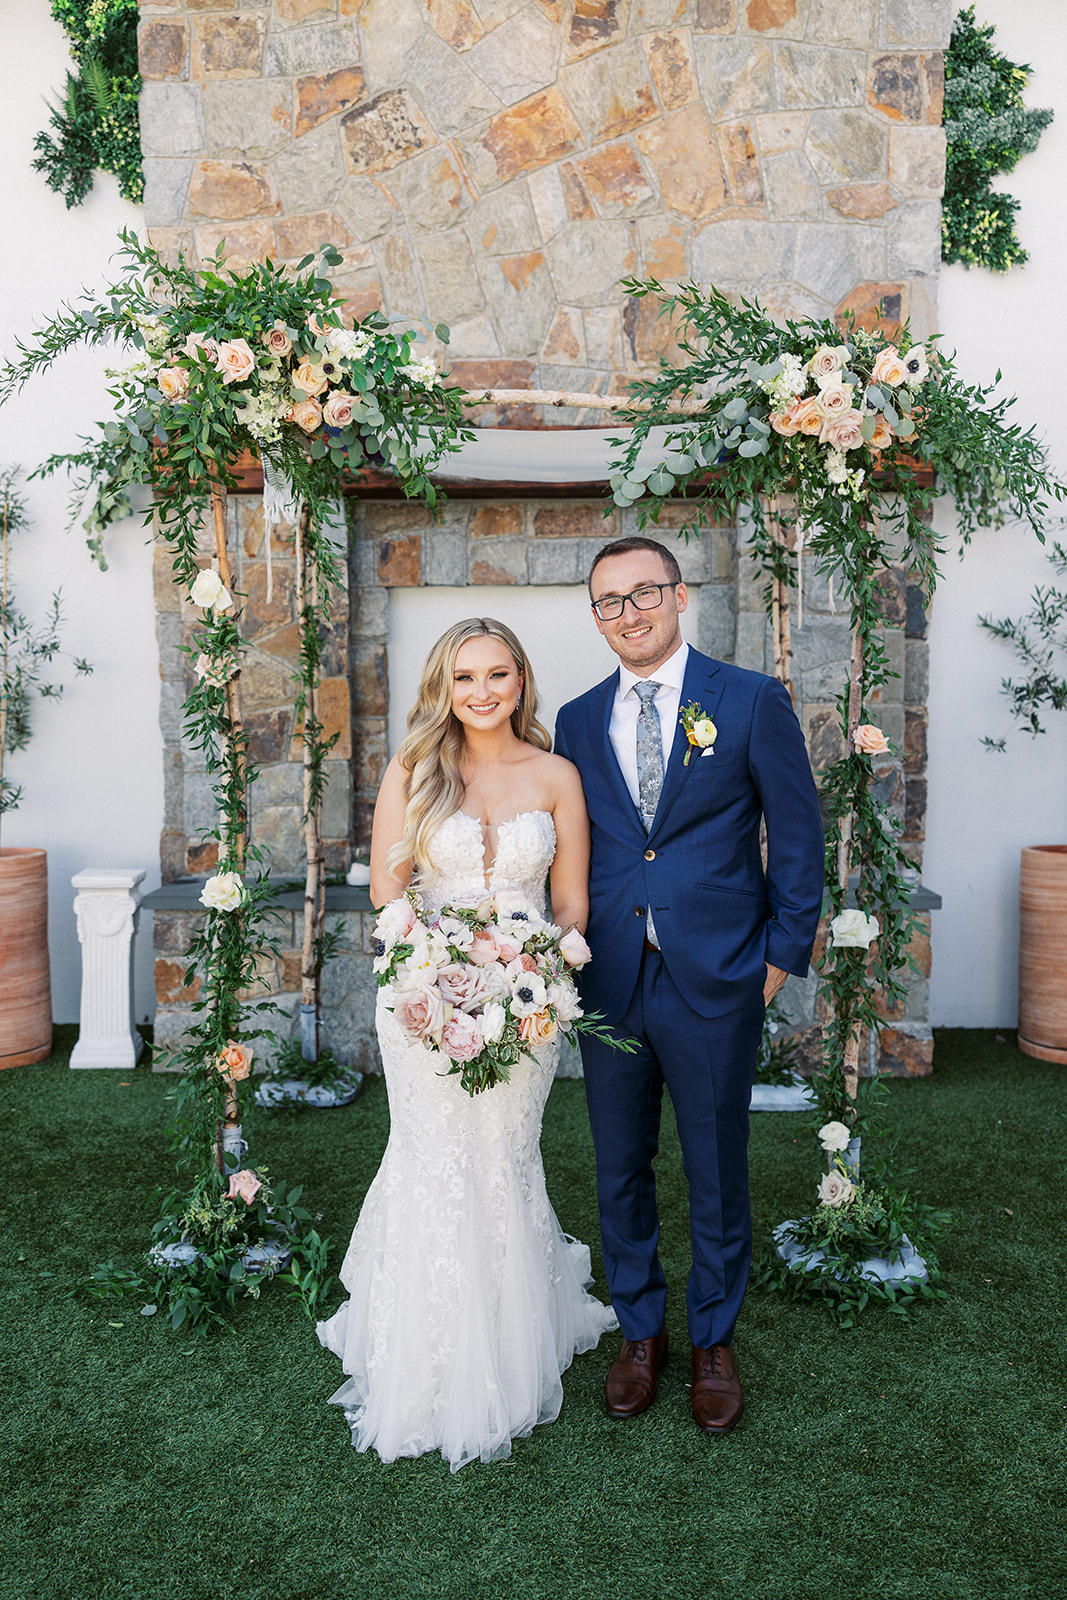 Newlyweds stand together under their floral arbor at The Reserve At Perona Farms wedding ceremony venue